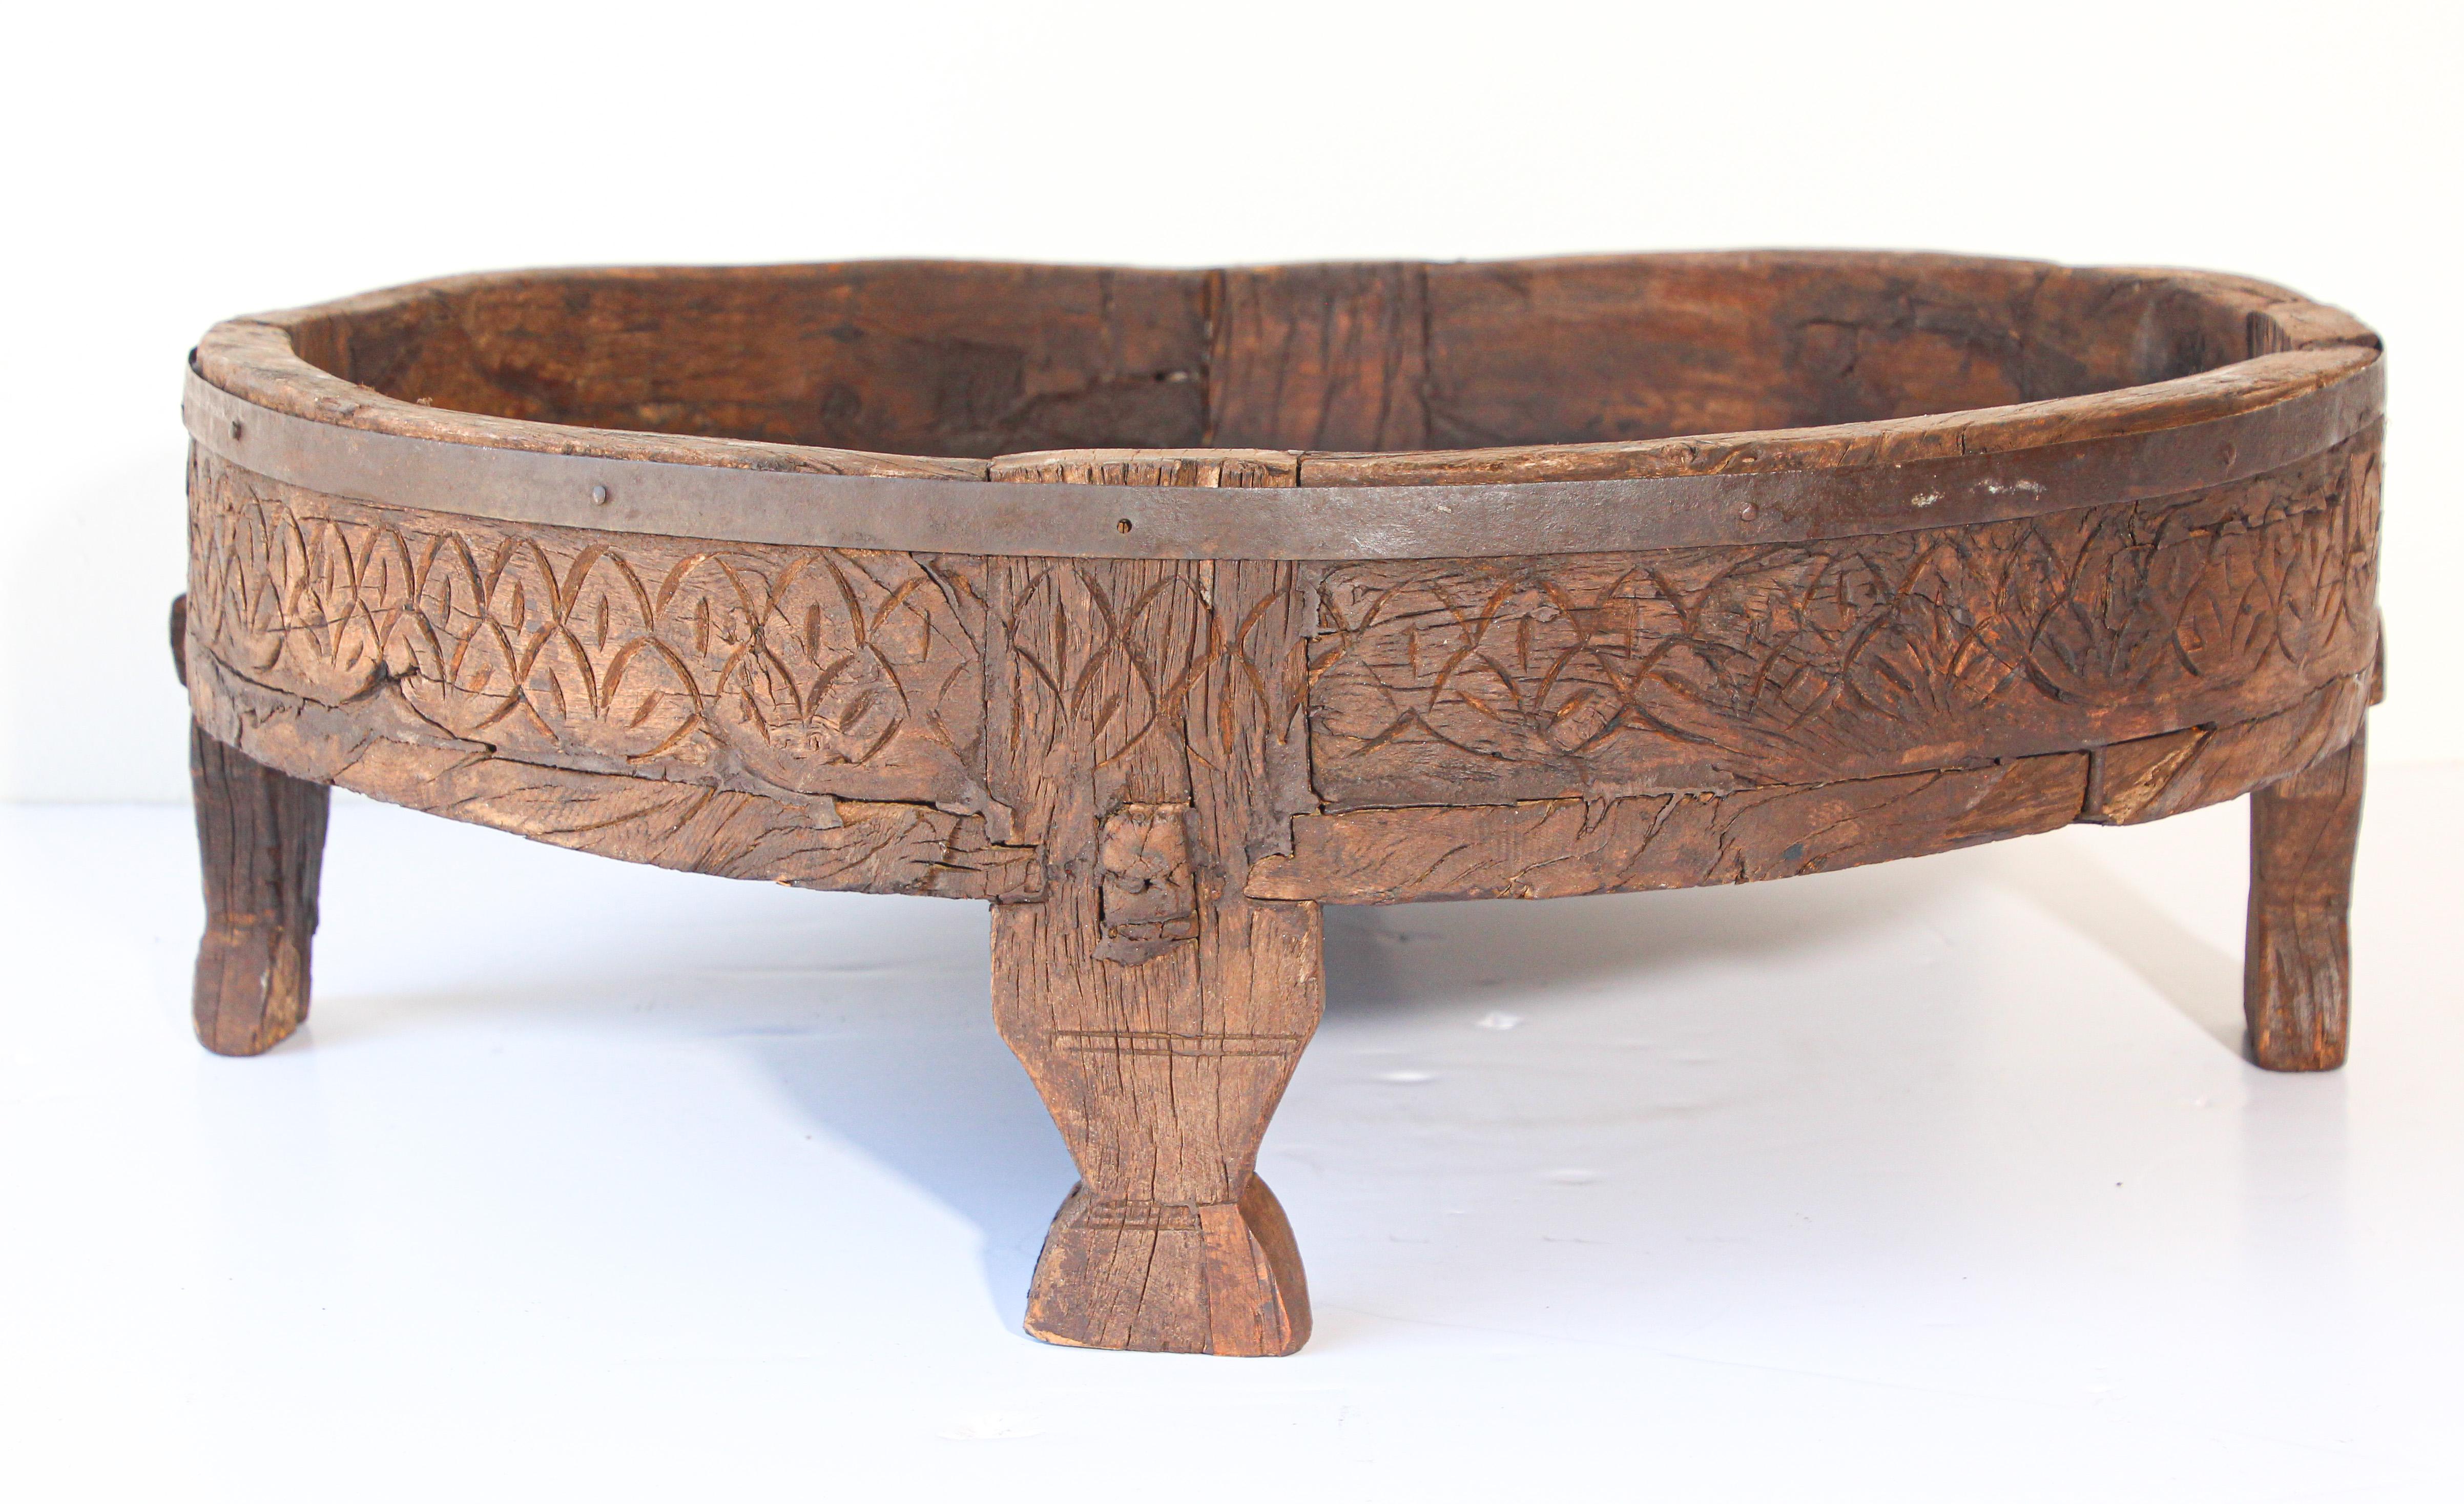 Hand-Carved Antique Round Tribal Low Teak Table